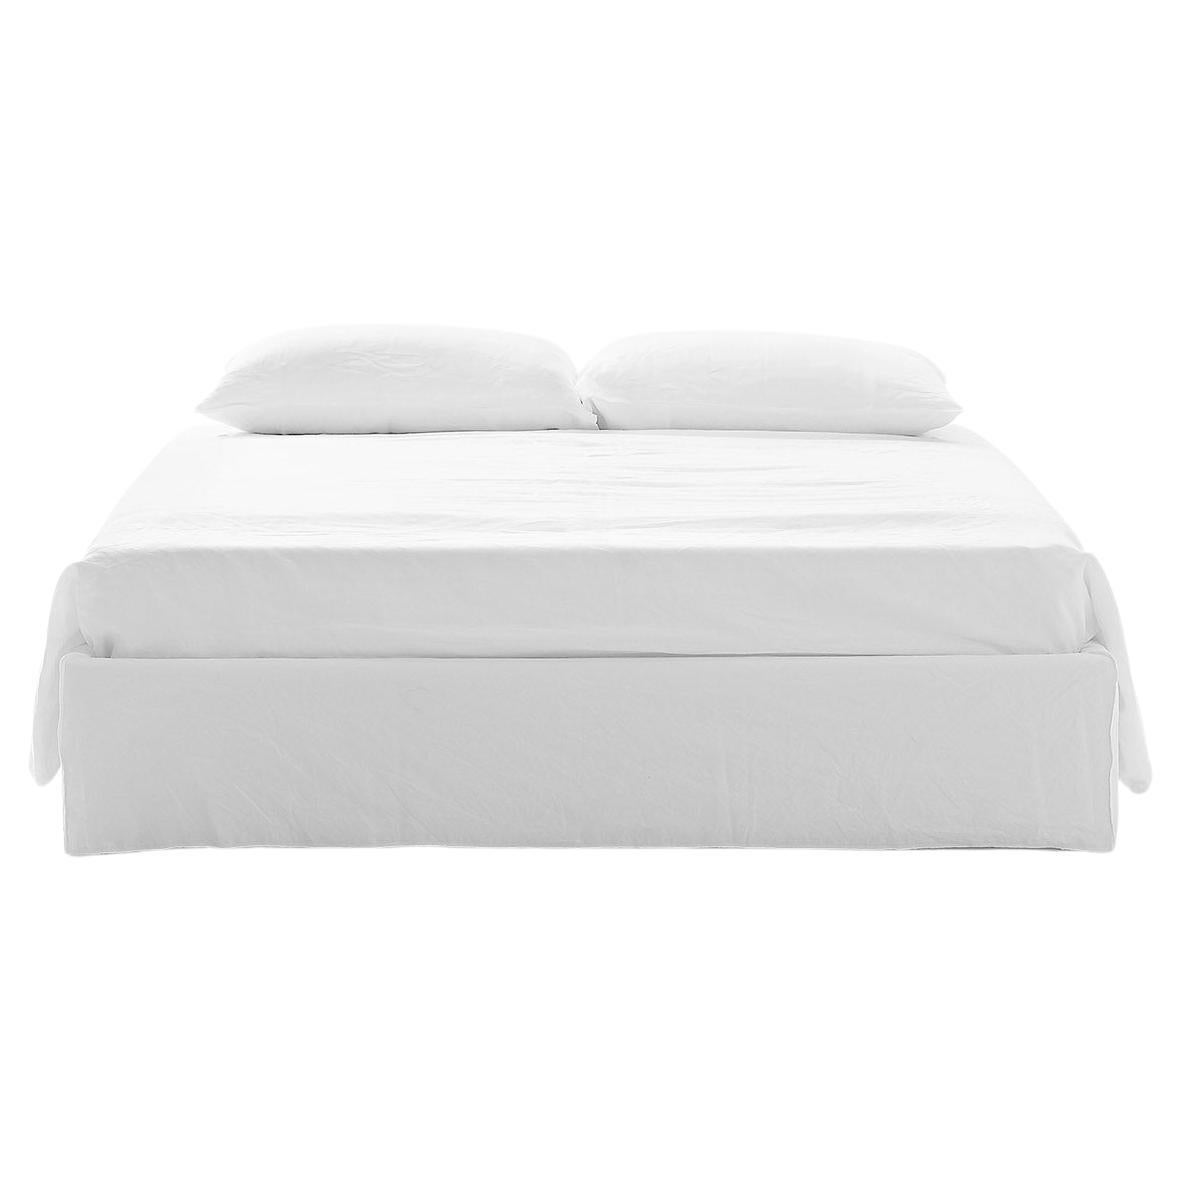 Gervasoni Ghost 80 SL Bed in White Linen Upholstery by Paola Navone For Sale